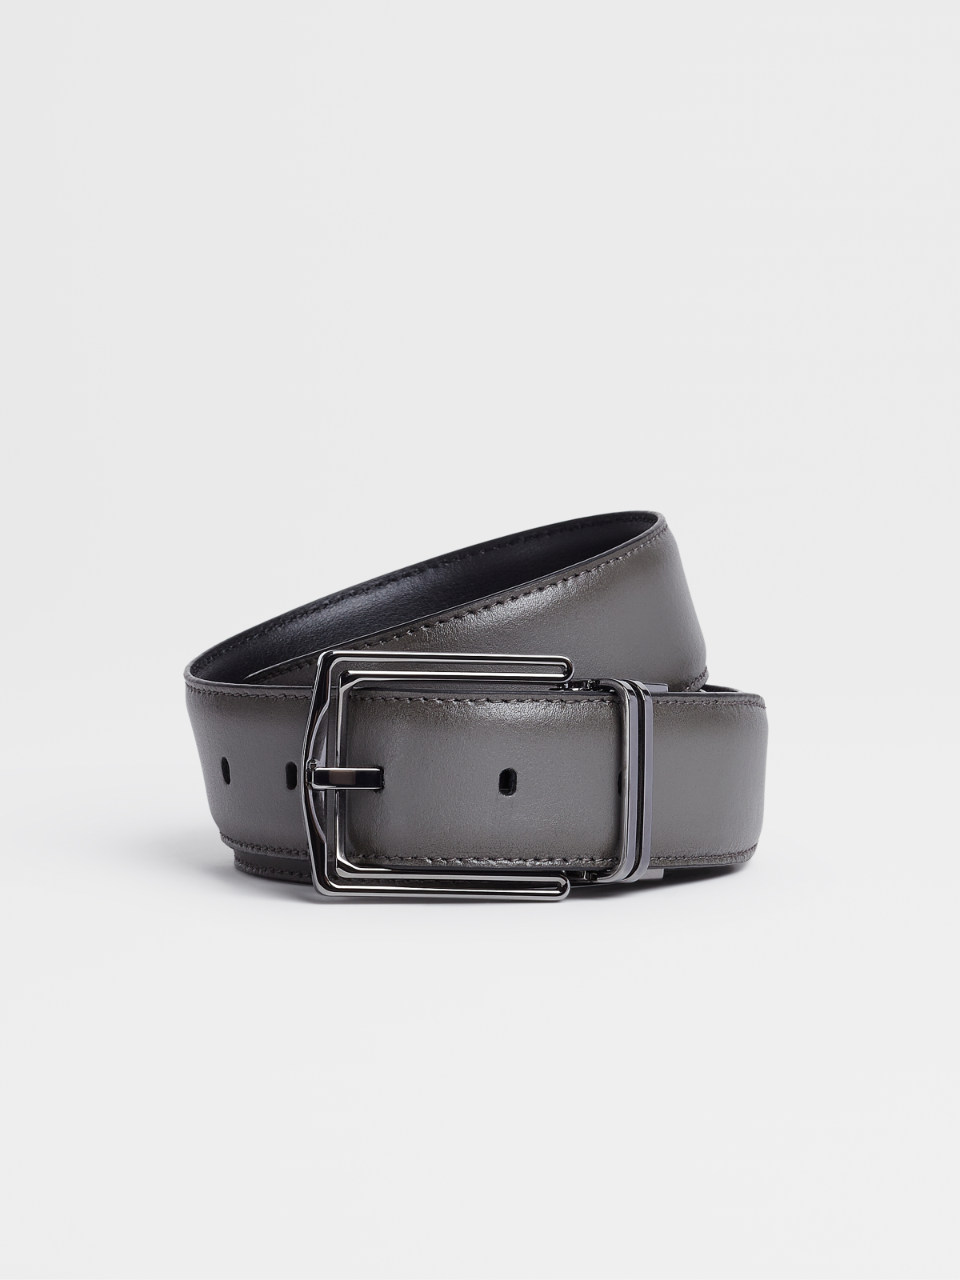 Dark Grey Leather and Black Leather Reversible Belt